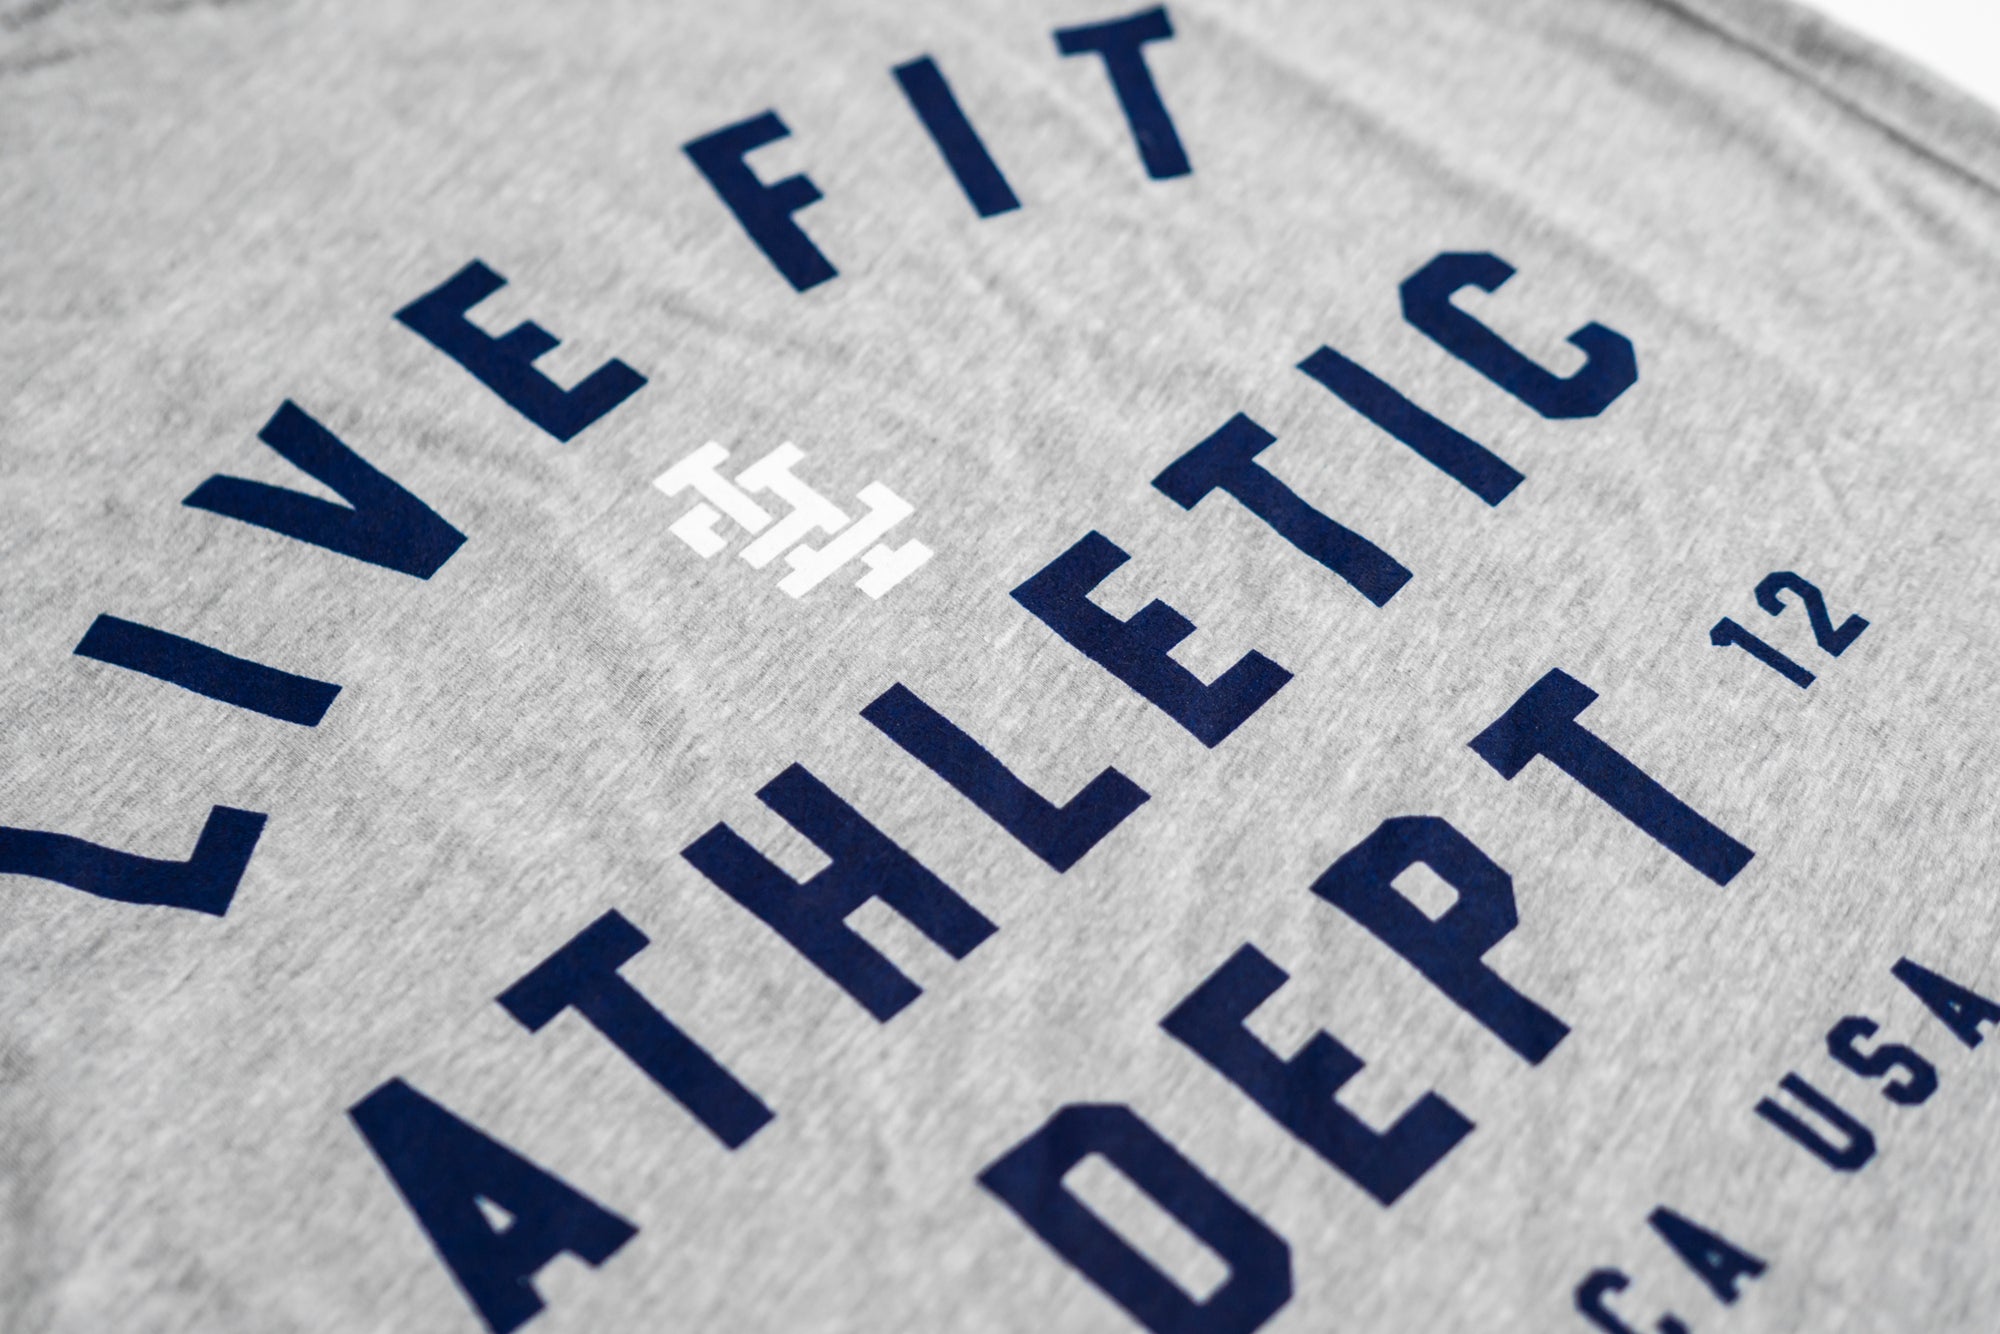 Athletic Department Tee - Heather Grey - Live Fit. Apparel